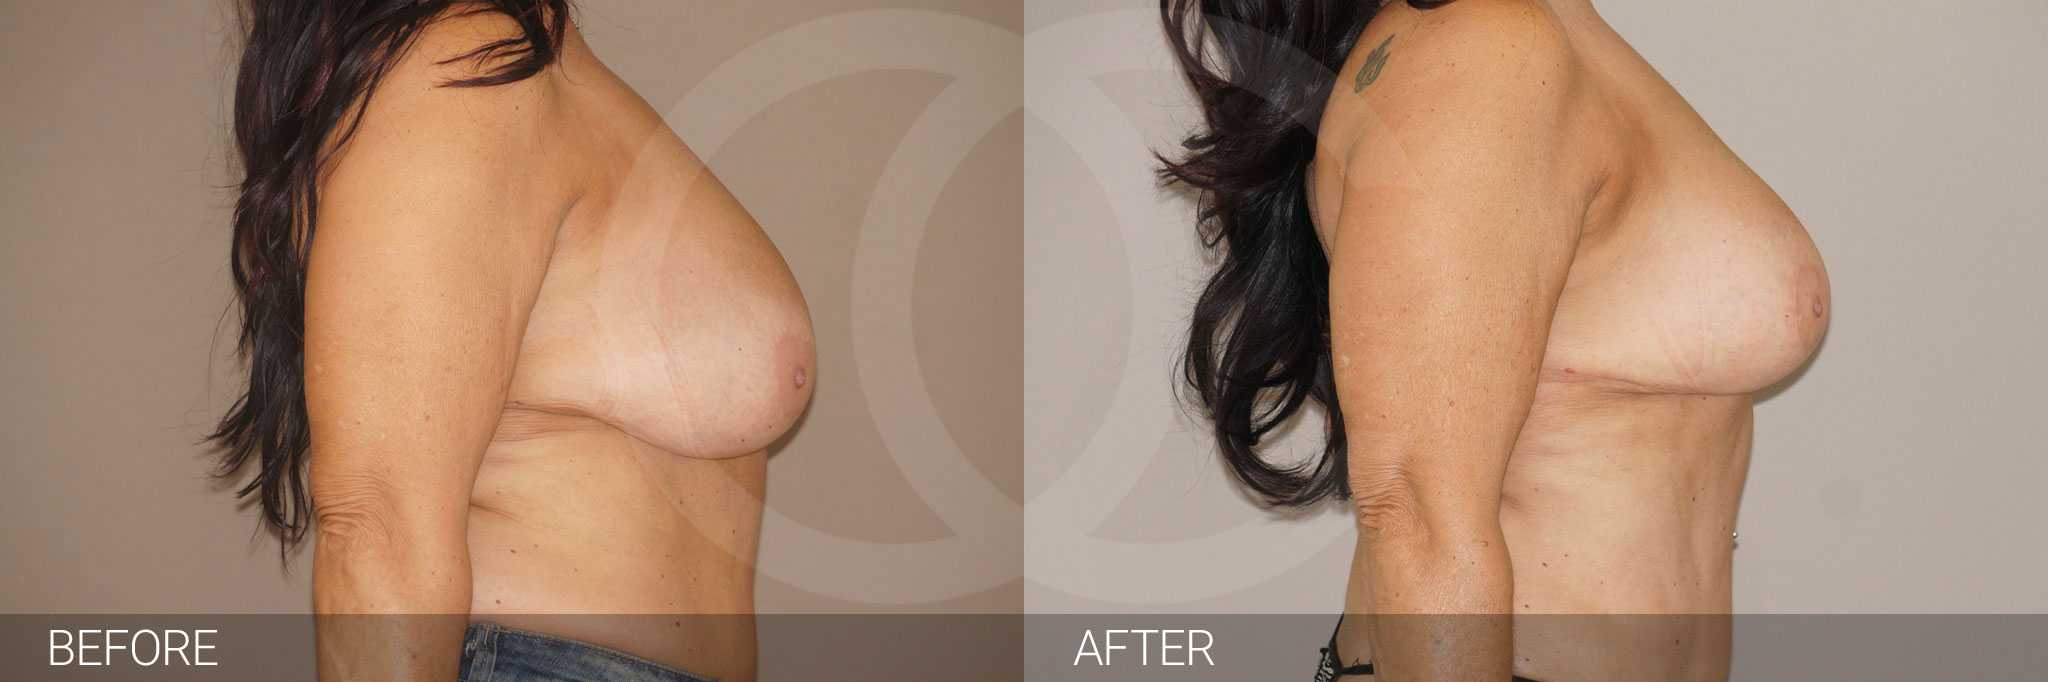 Breast Reduction REDUCTION MAMMOPLASTY ante/post-op III